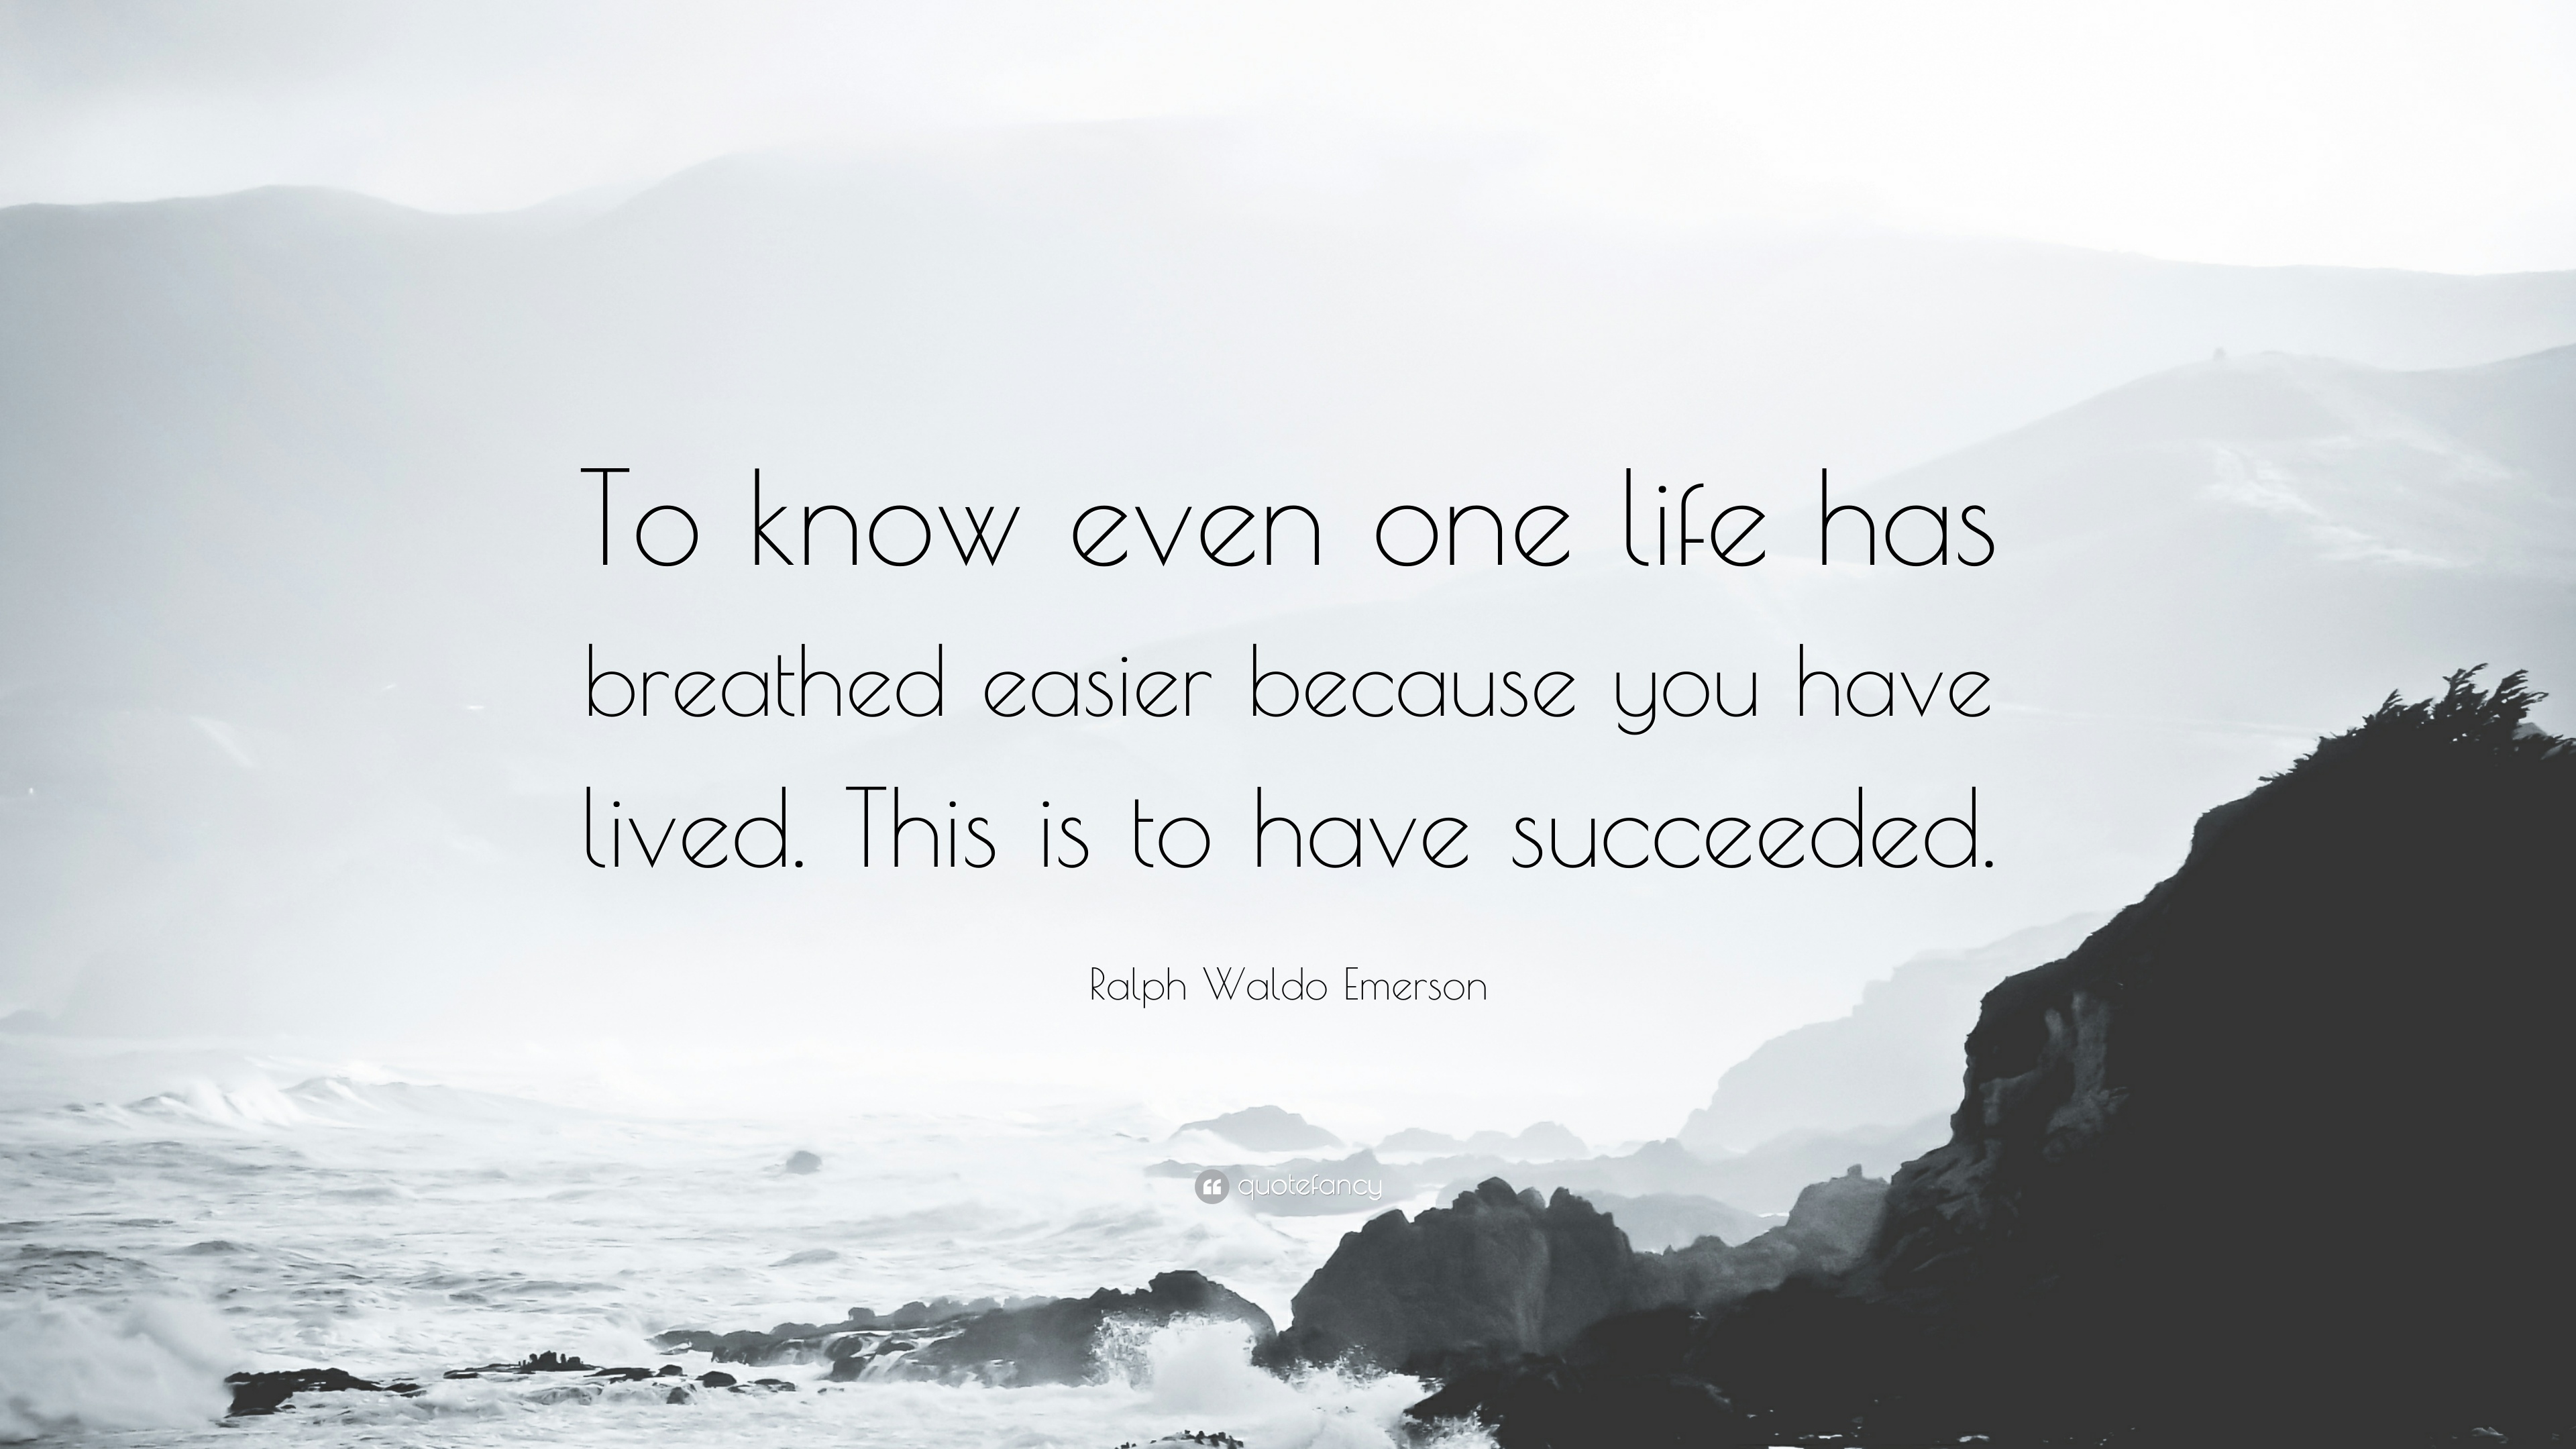 36584-Ralph-Waldo-Emerson-Quote-To-know-even-one-life-has-breathed